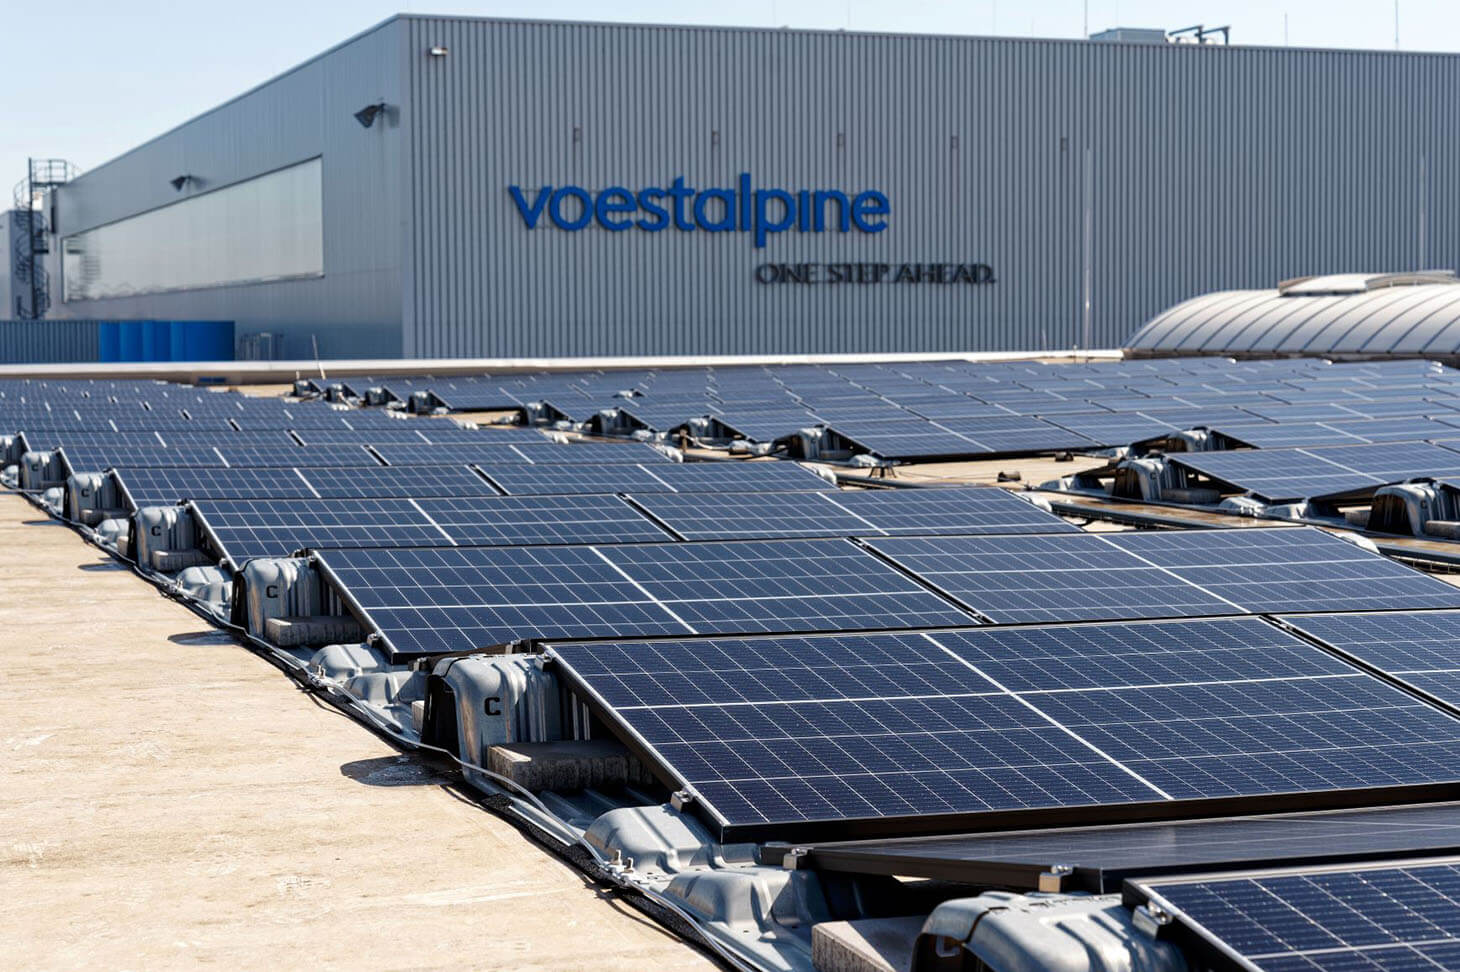 Many rows of photovoltaic modules on a voestalpine factory building